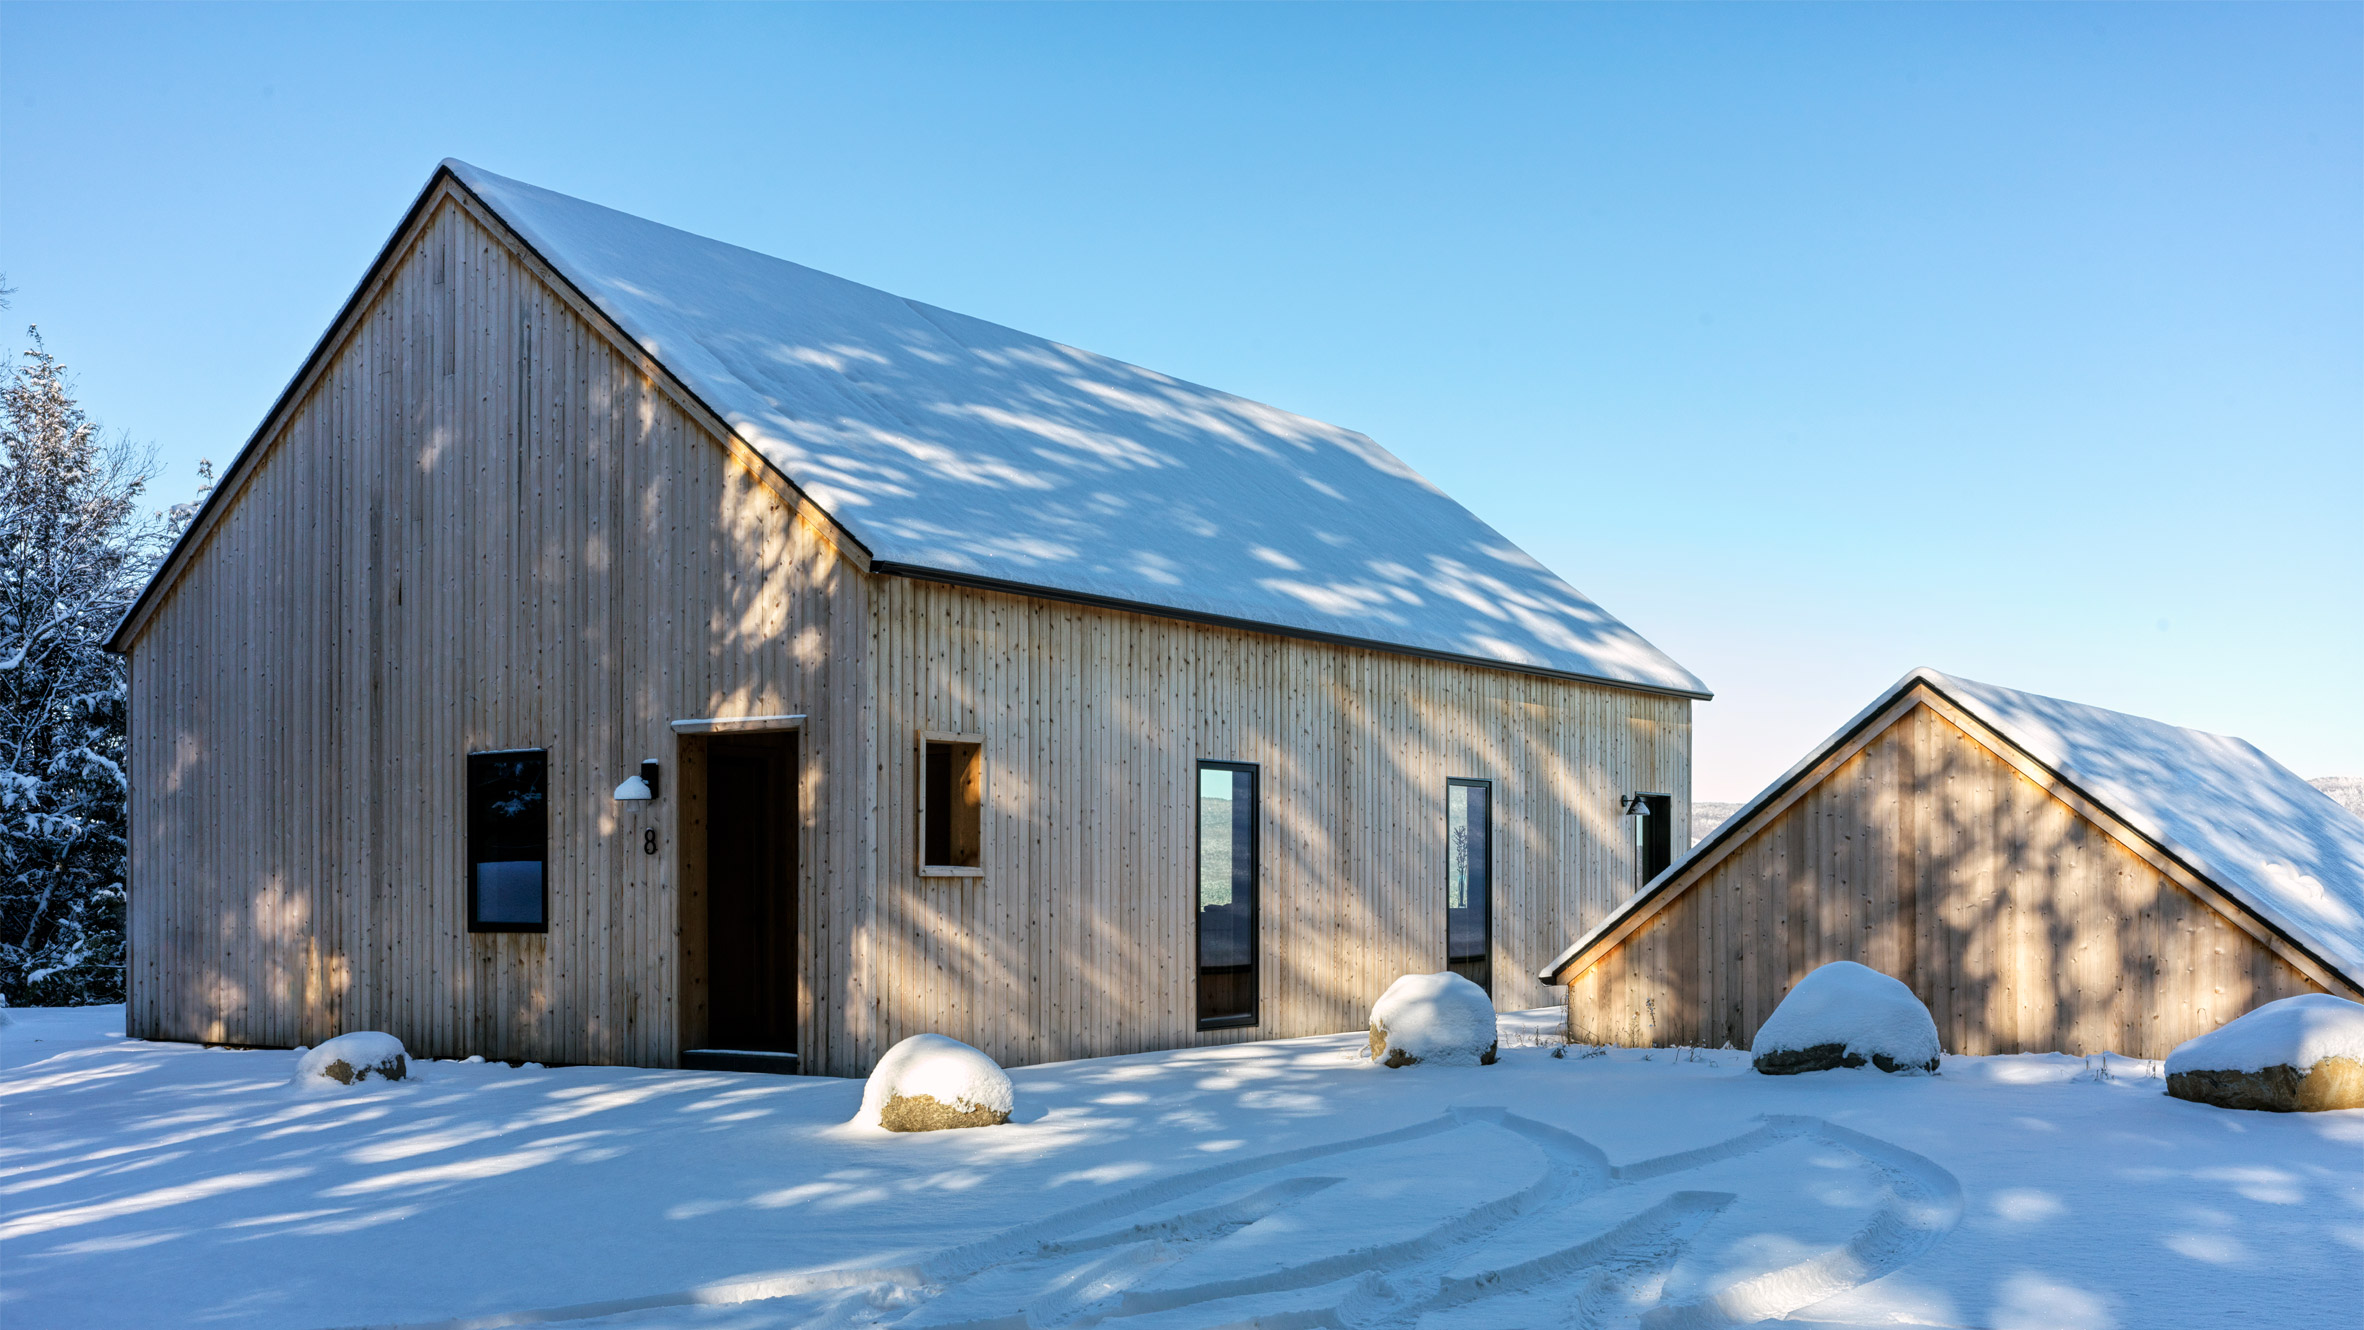 Two timber-clad pitched-roof structures on a snowy hill